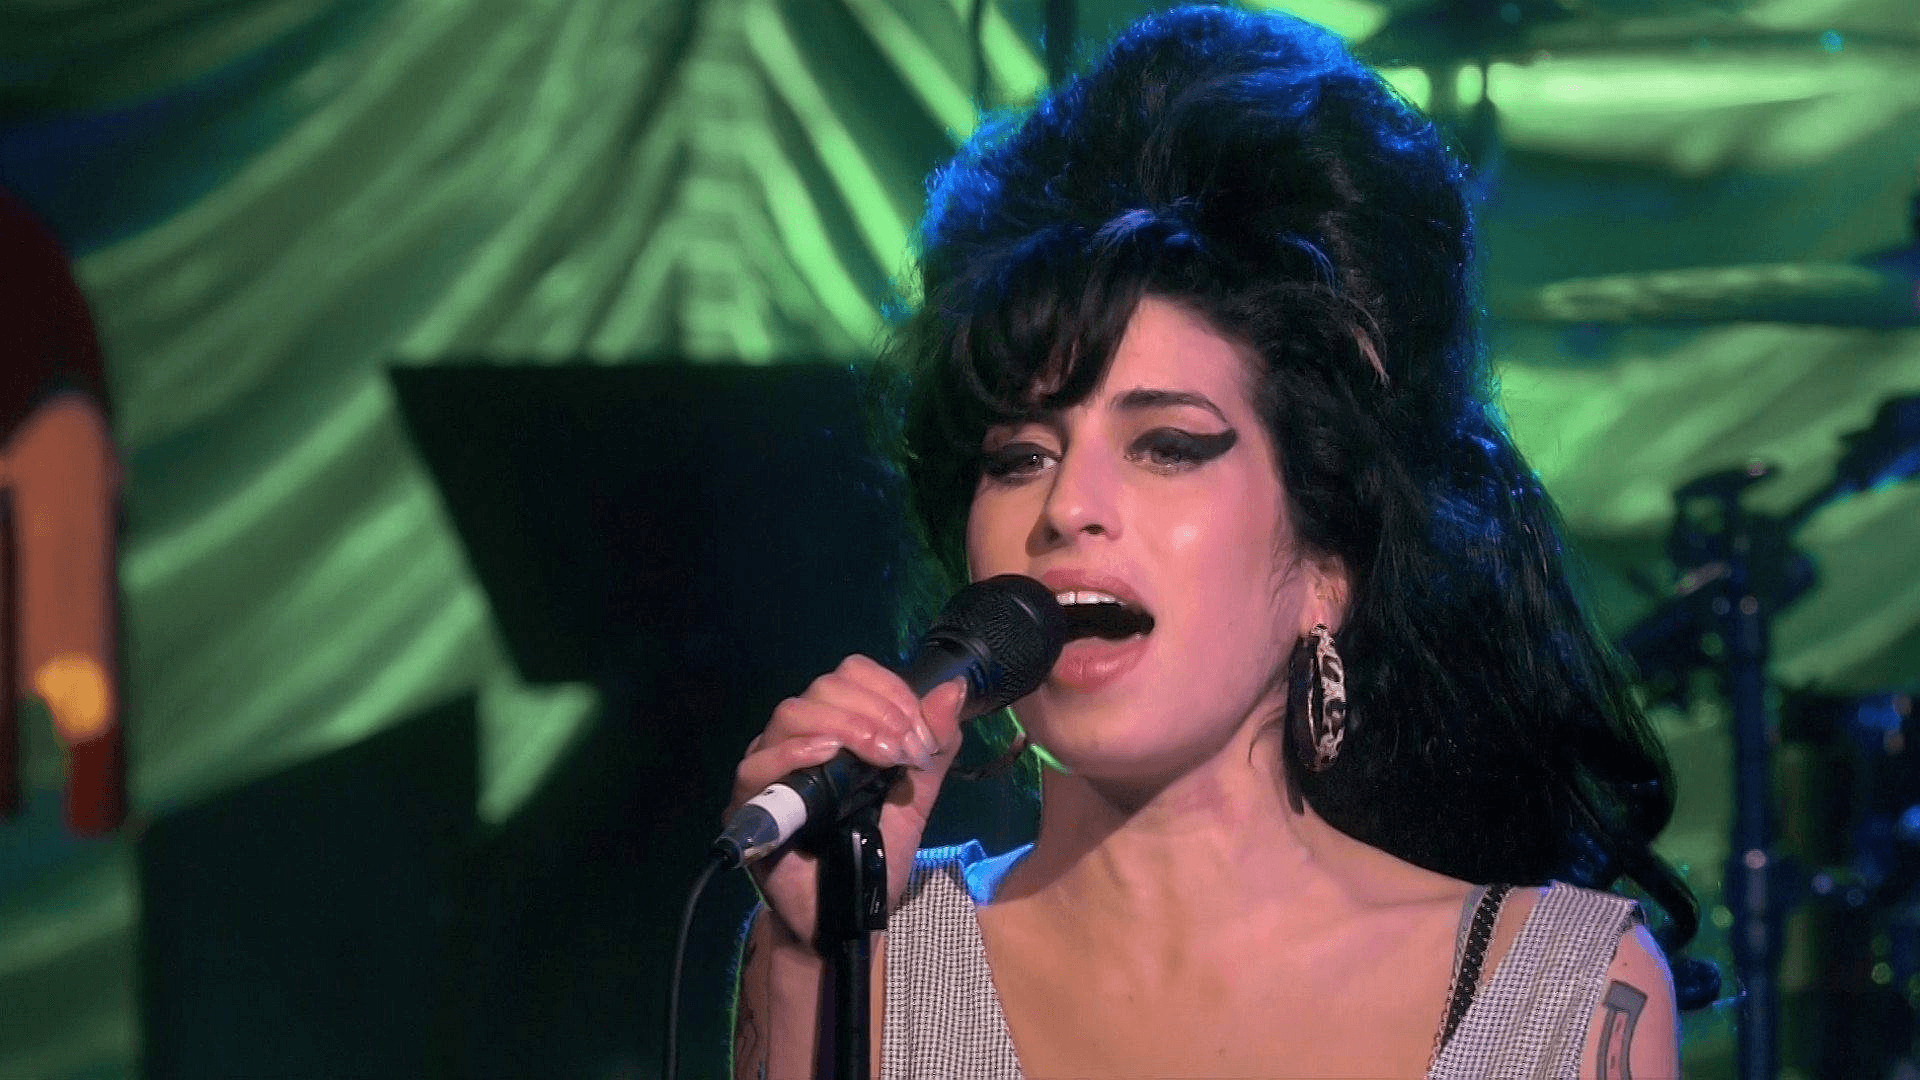 Amy Winehouse - Live in London 2007